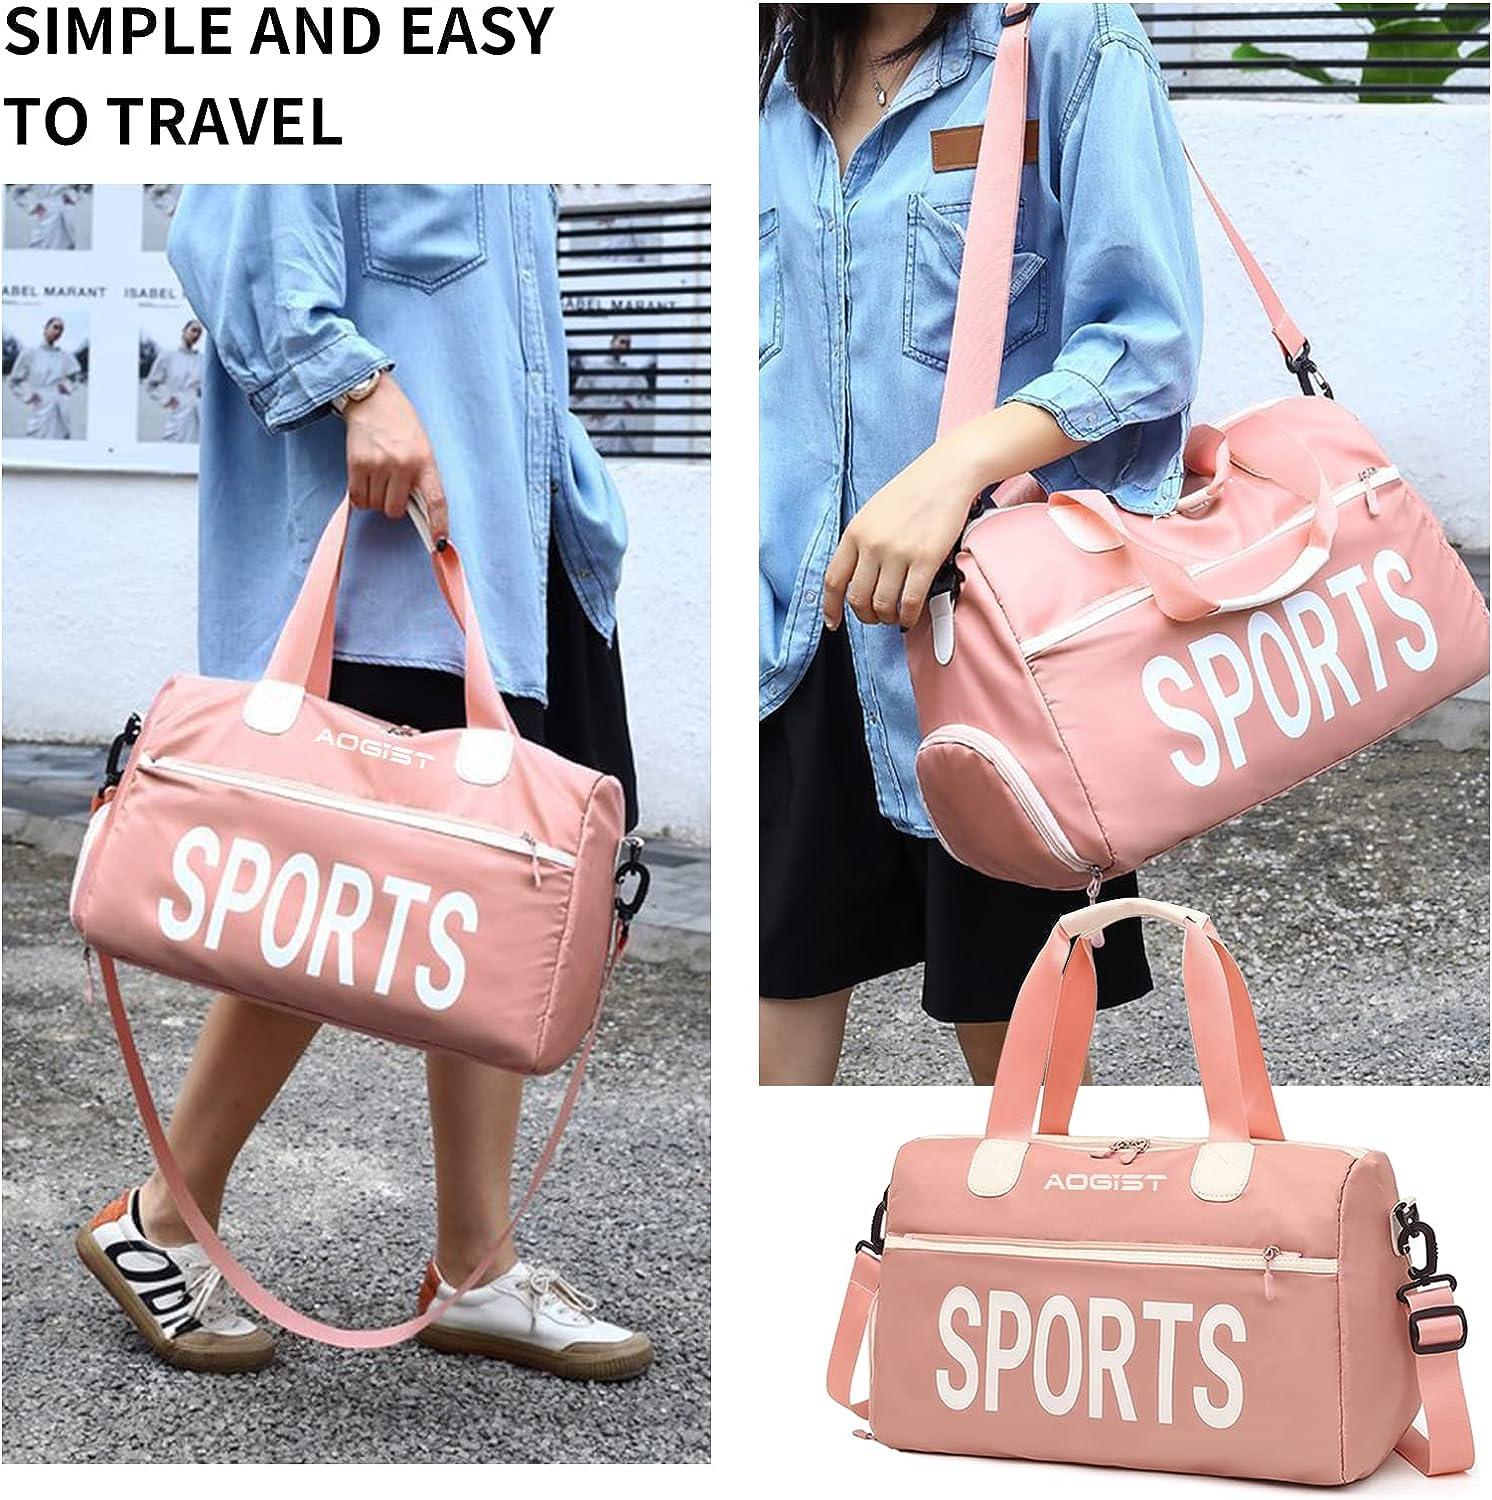 Weekender Bags for Women,Travel Duffle Bags Carry on Gym Bag,Overnight Bag  with Trolley Sleeve & Wet Pocket, Sports Tote Gym Bag, Travel bag for Women  